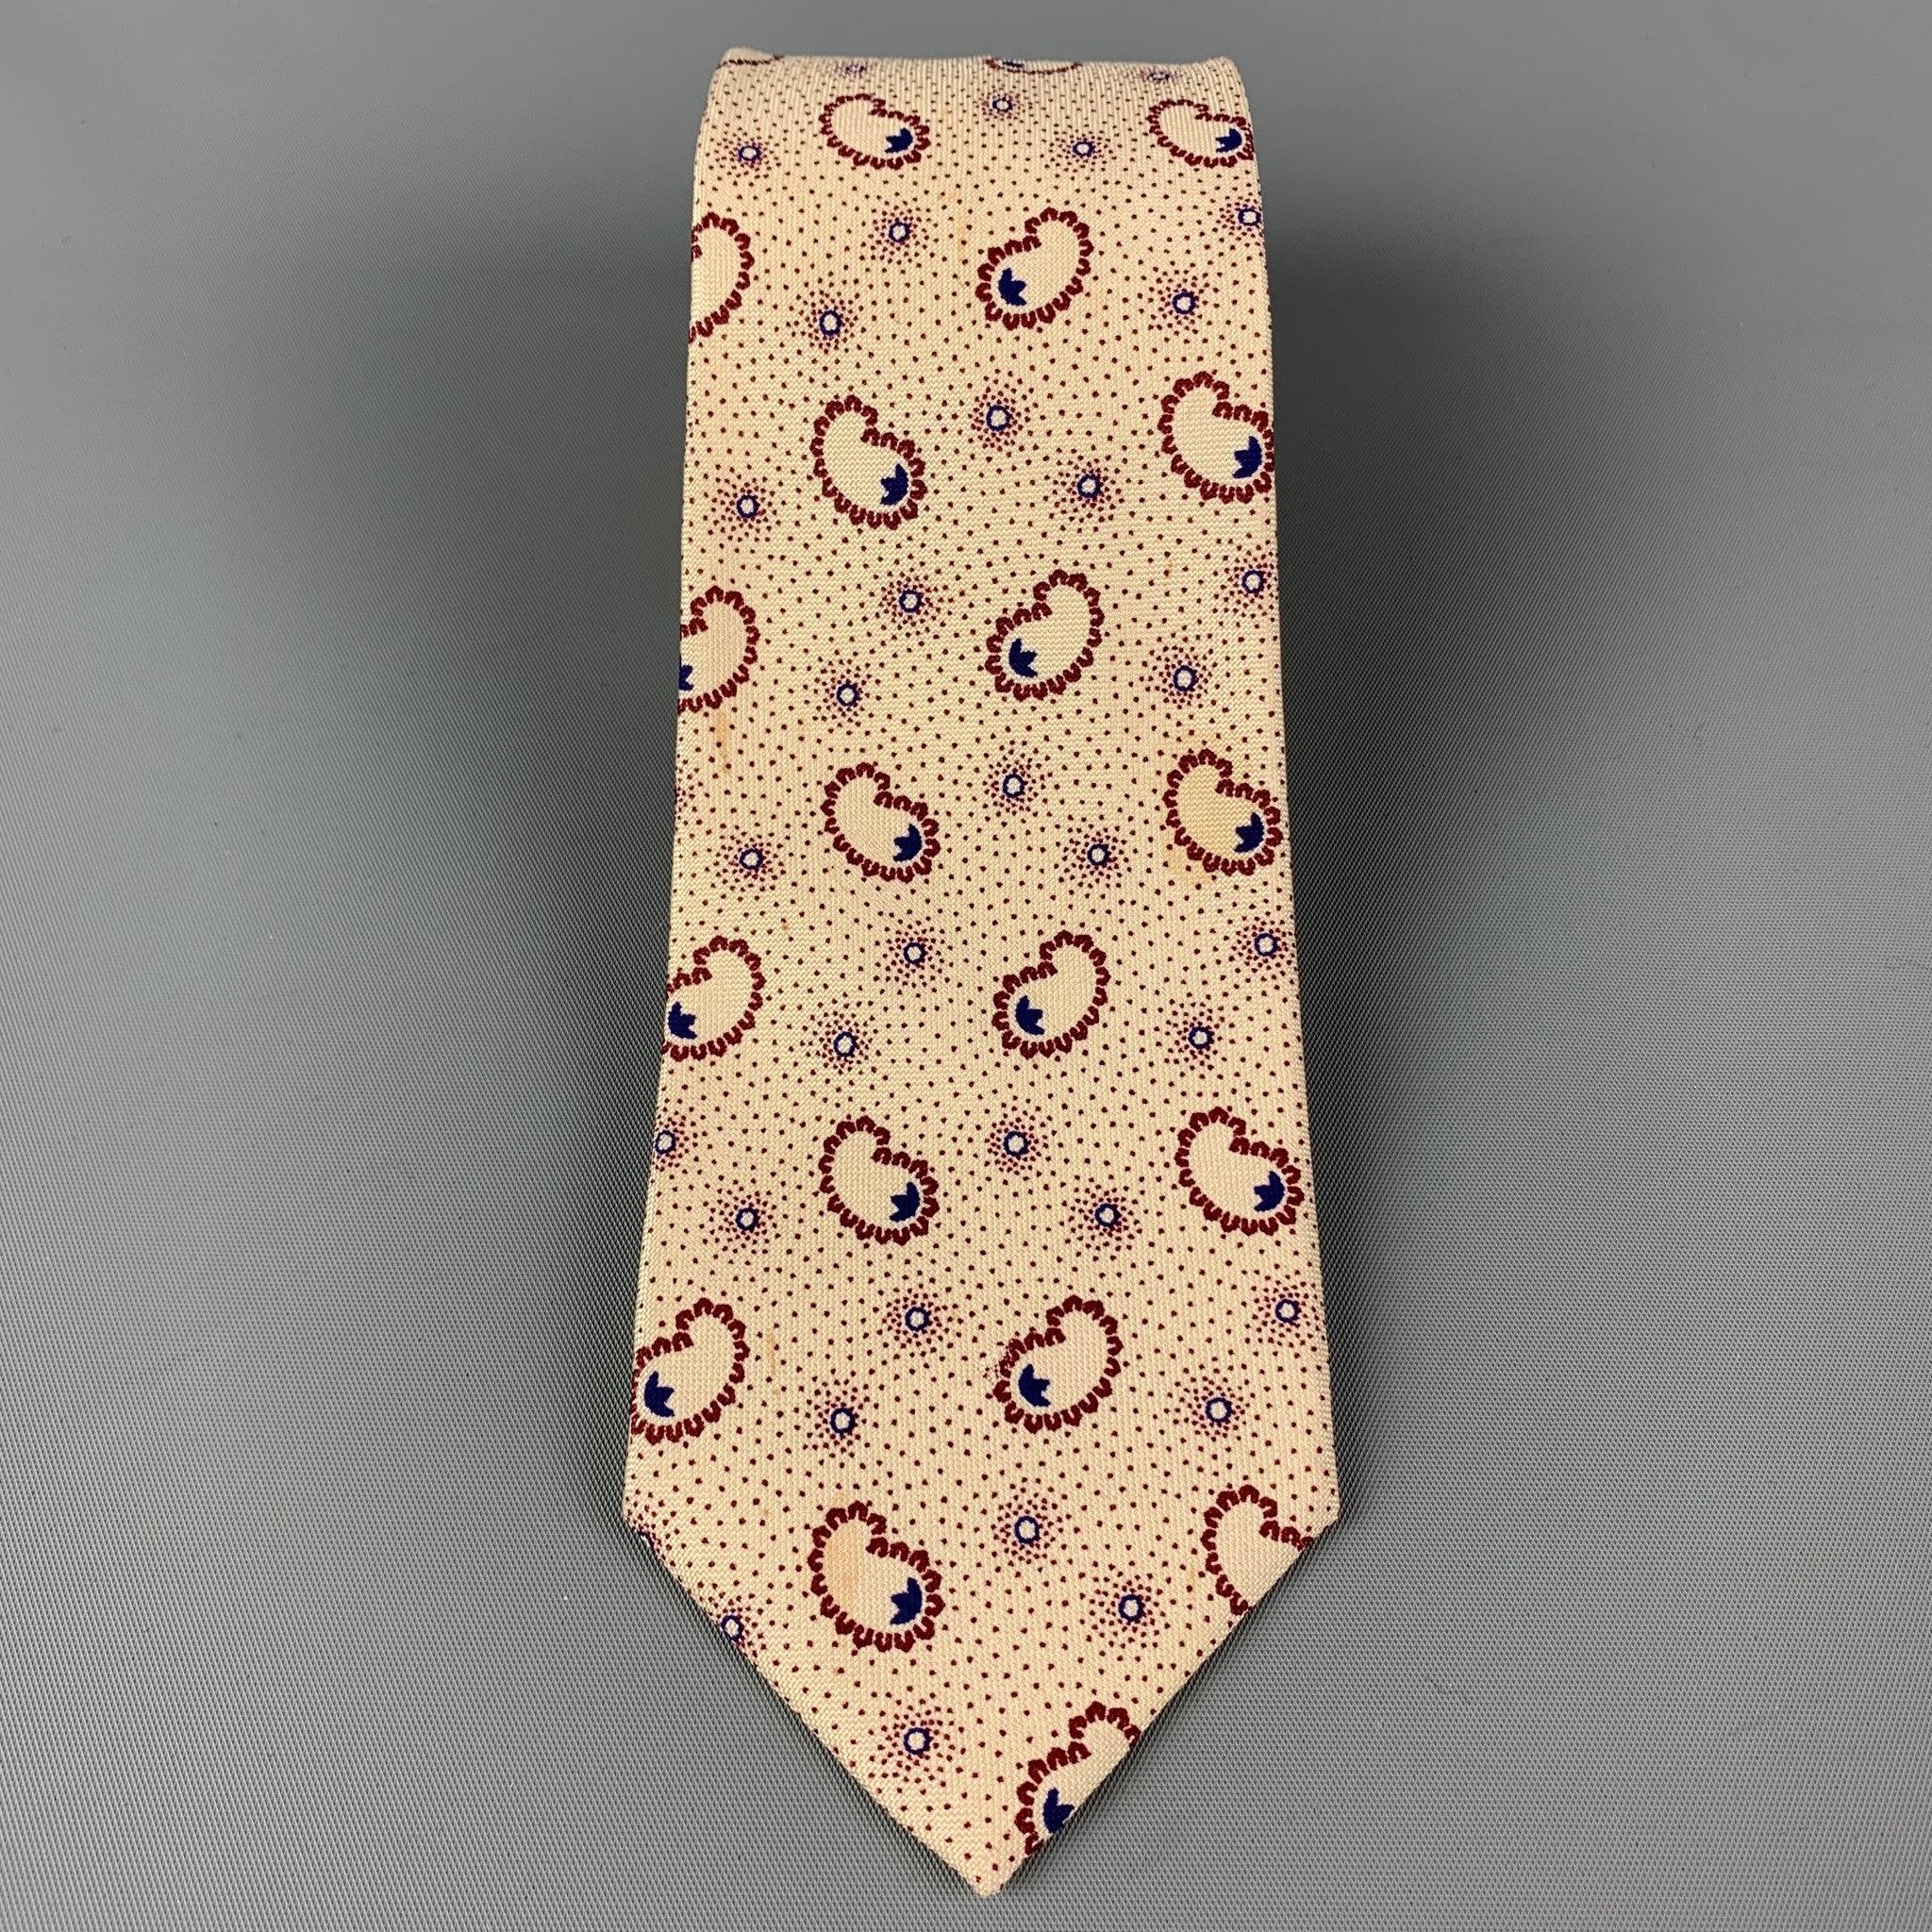 KENZO
necktie comes in a cream& burgundy material with a all over dot print.  Good Pre-Owned Condition. 

Measurements: 
  Width: 2.75 inches  Length: 56 inches 
  
  
 
Reference: 119903
Category: Tie
More Details
    
Brand:  KENZO
Color:  Cream &